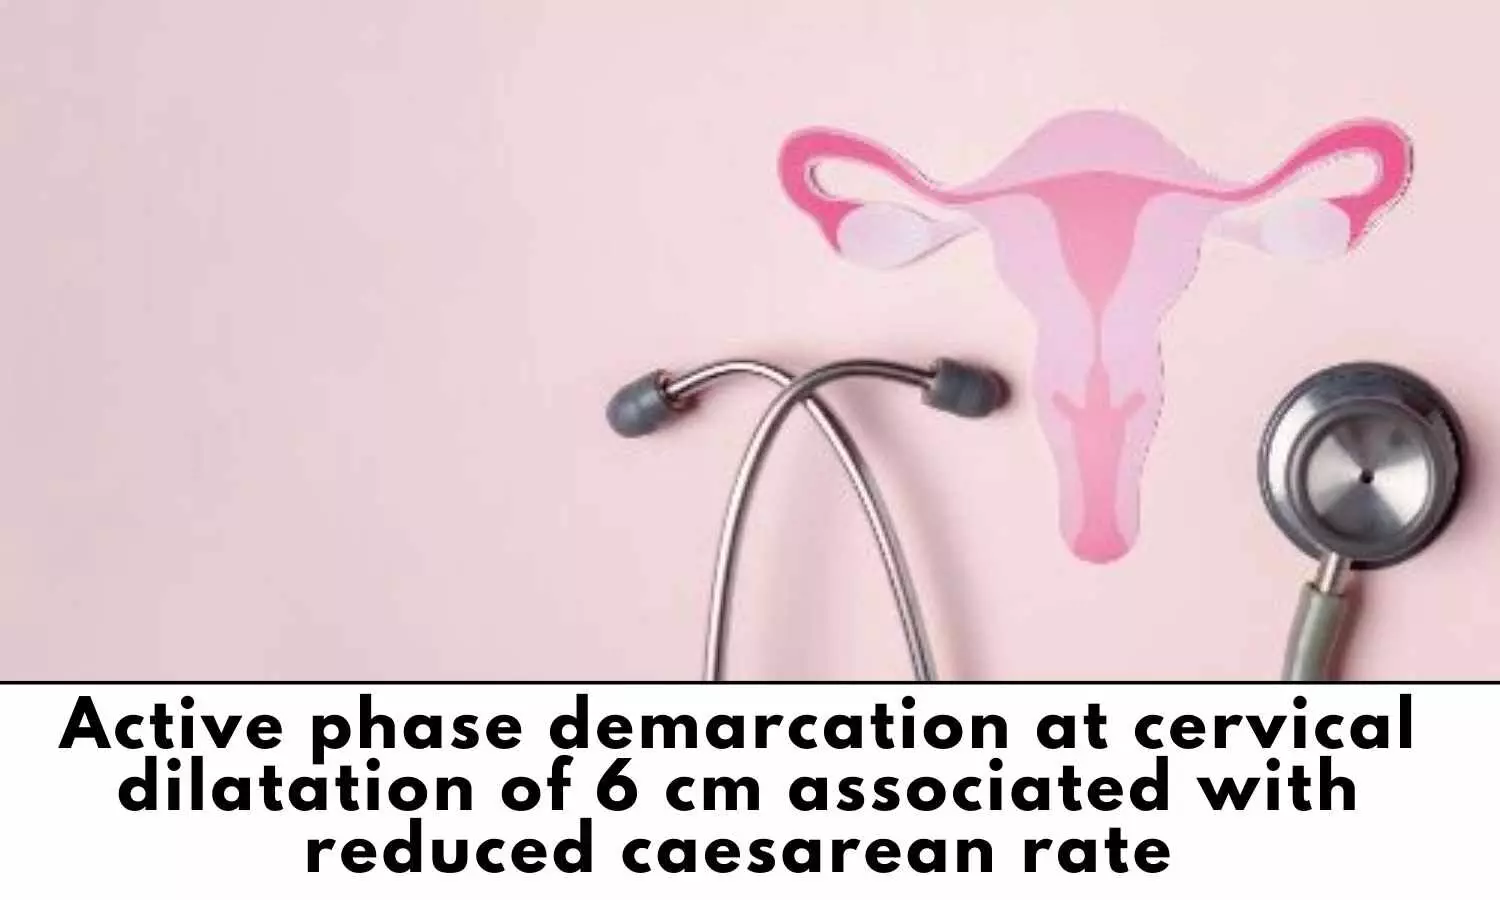 Active cervical dilatation of 6 cm associated with a reduced cesarean rate